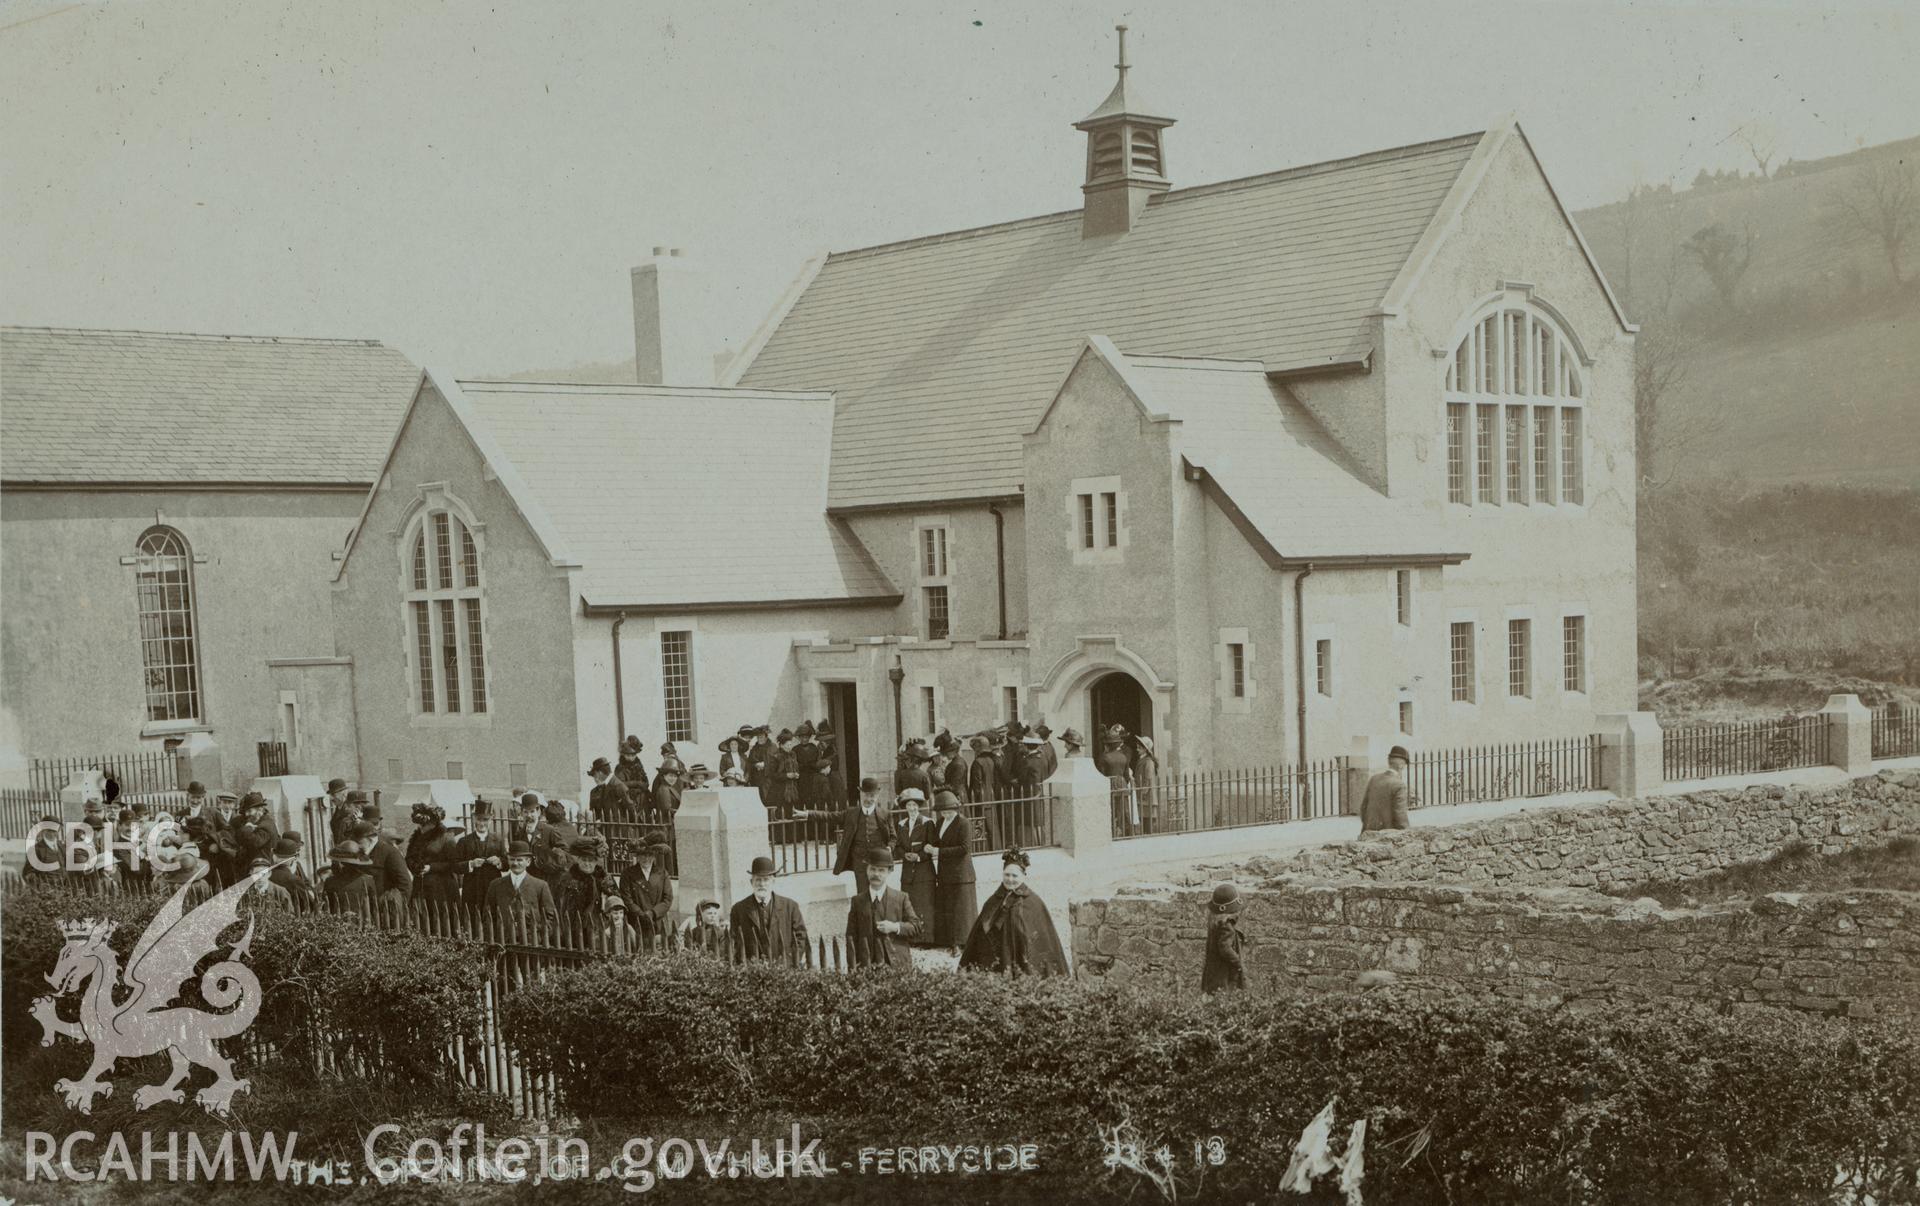 Digital copy of black and white postcard showing exterior view of Bethania Welsh Calvinistic Methodist chapel, Ferryside, on the day it was opened after rebuilding in 1911. Loaned for copying by Thomas Lloyd.